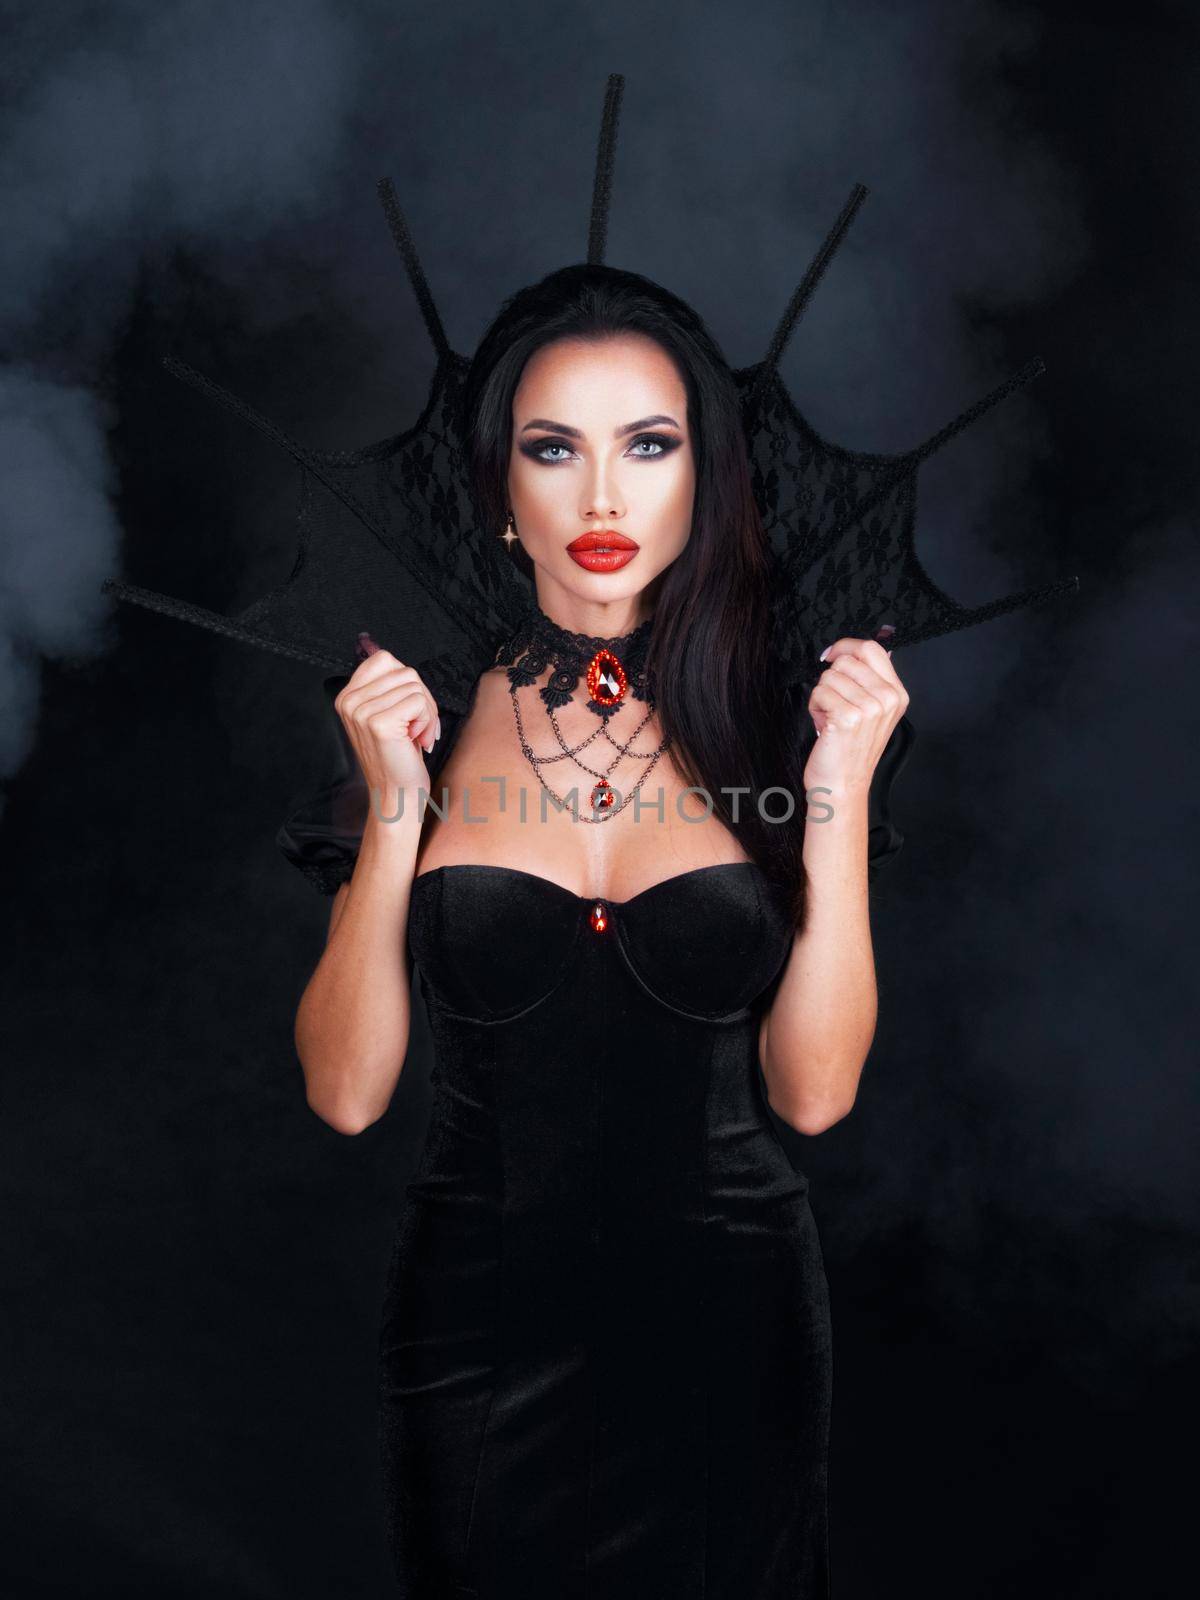 Beautiful young woman as sexy vampire in black dress with high collar and red gemstone jewelry - halloween portrait